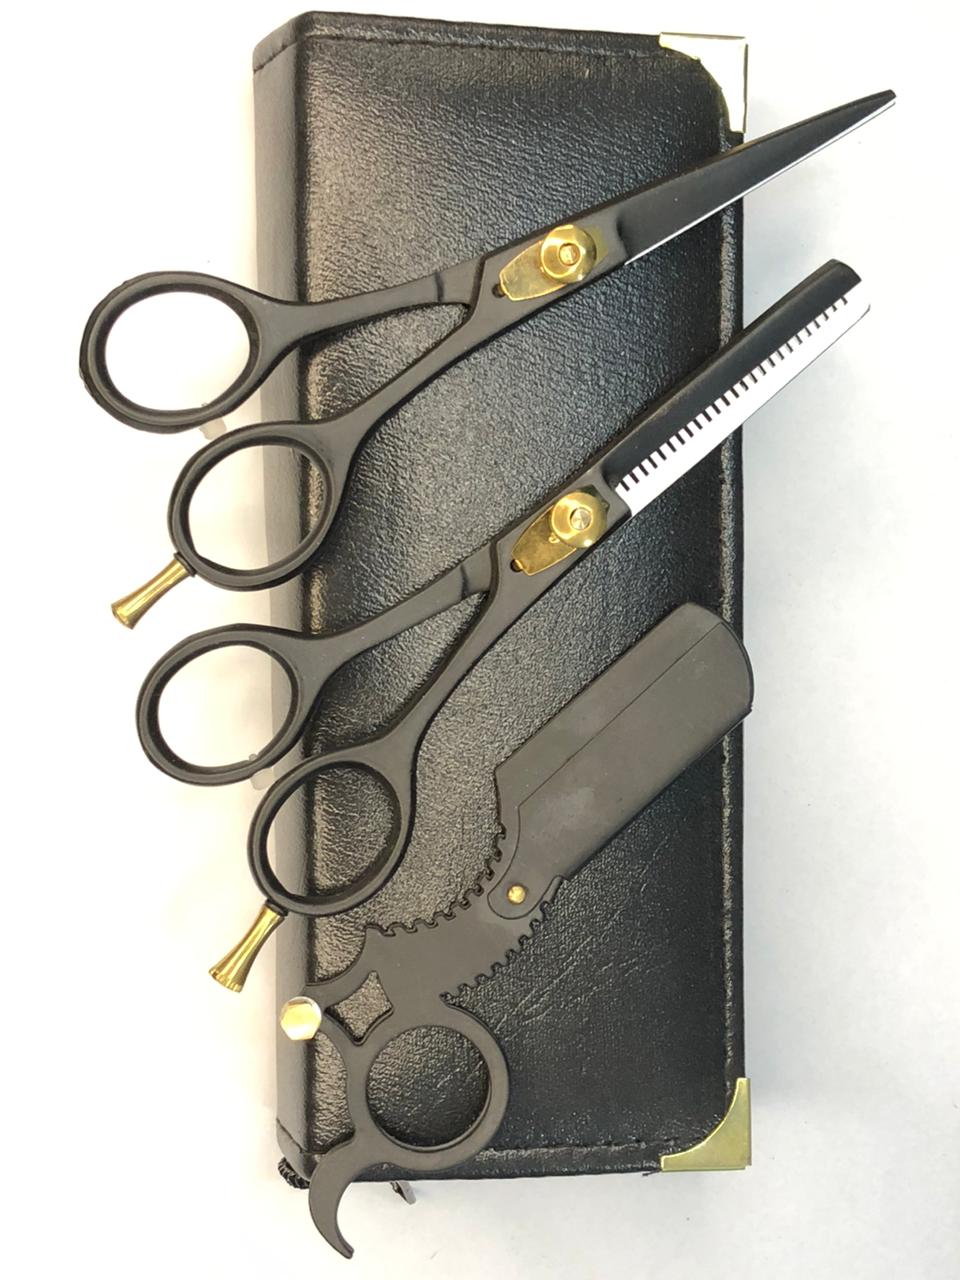 #3771 Barber Professional Hairdressing Haircutting Scissors Set